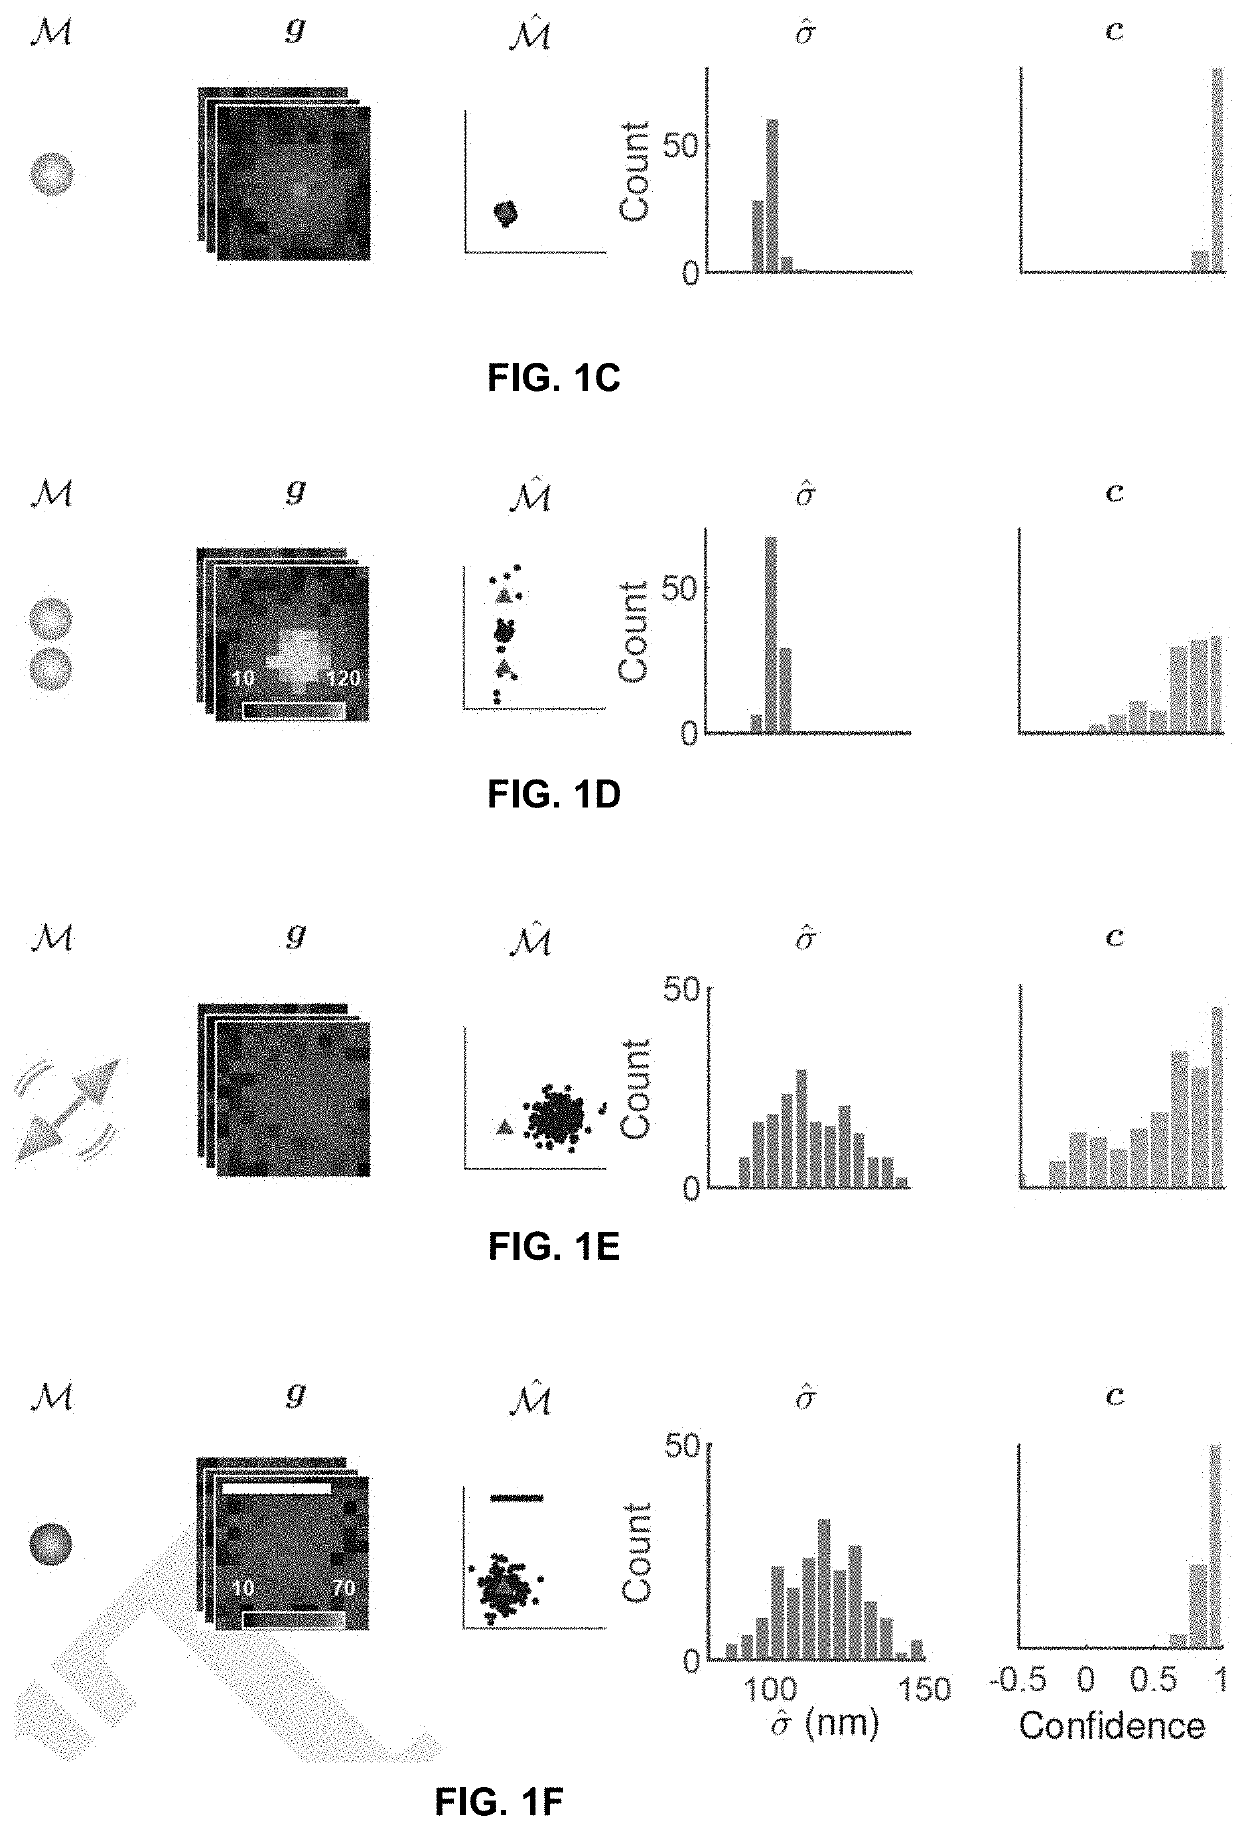 Methods for quantifying and enhancing accuracy in microscopy using measures of localization confidence